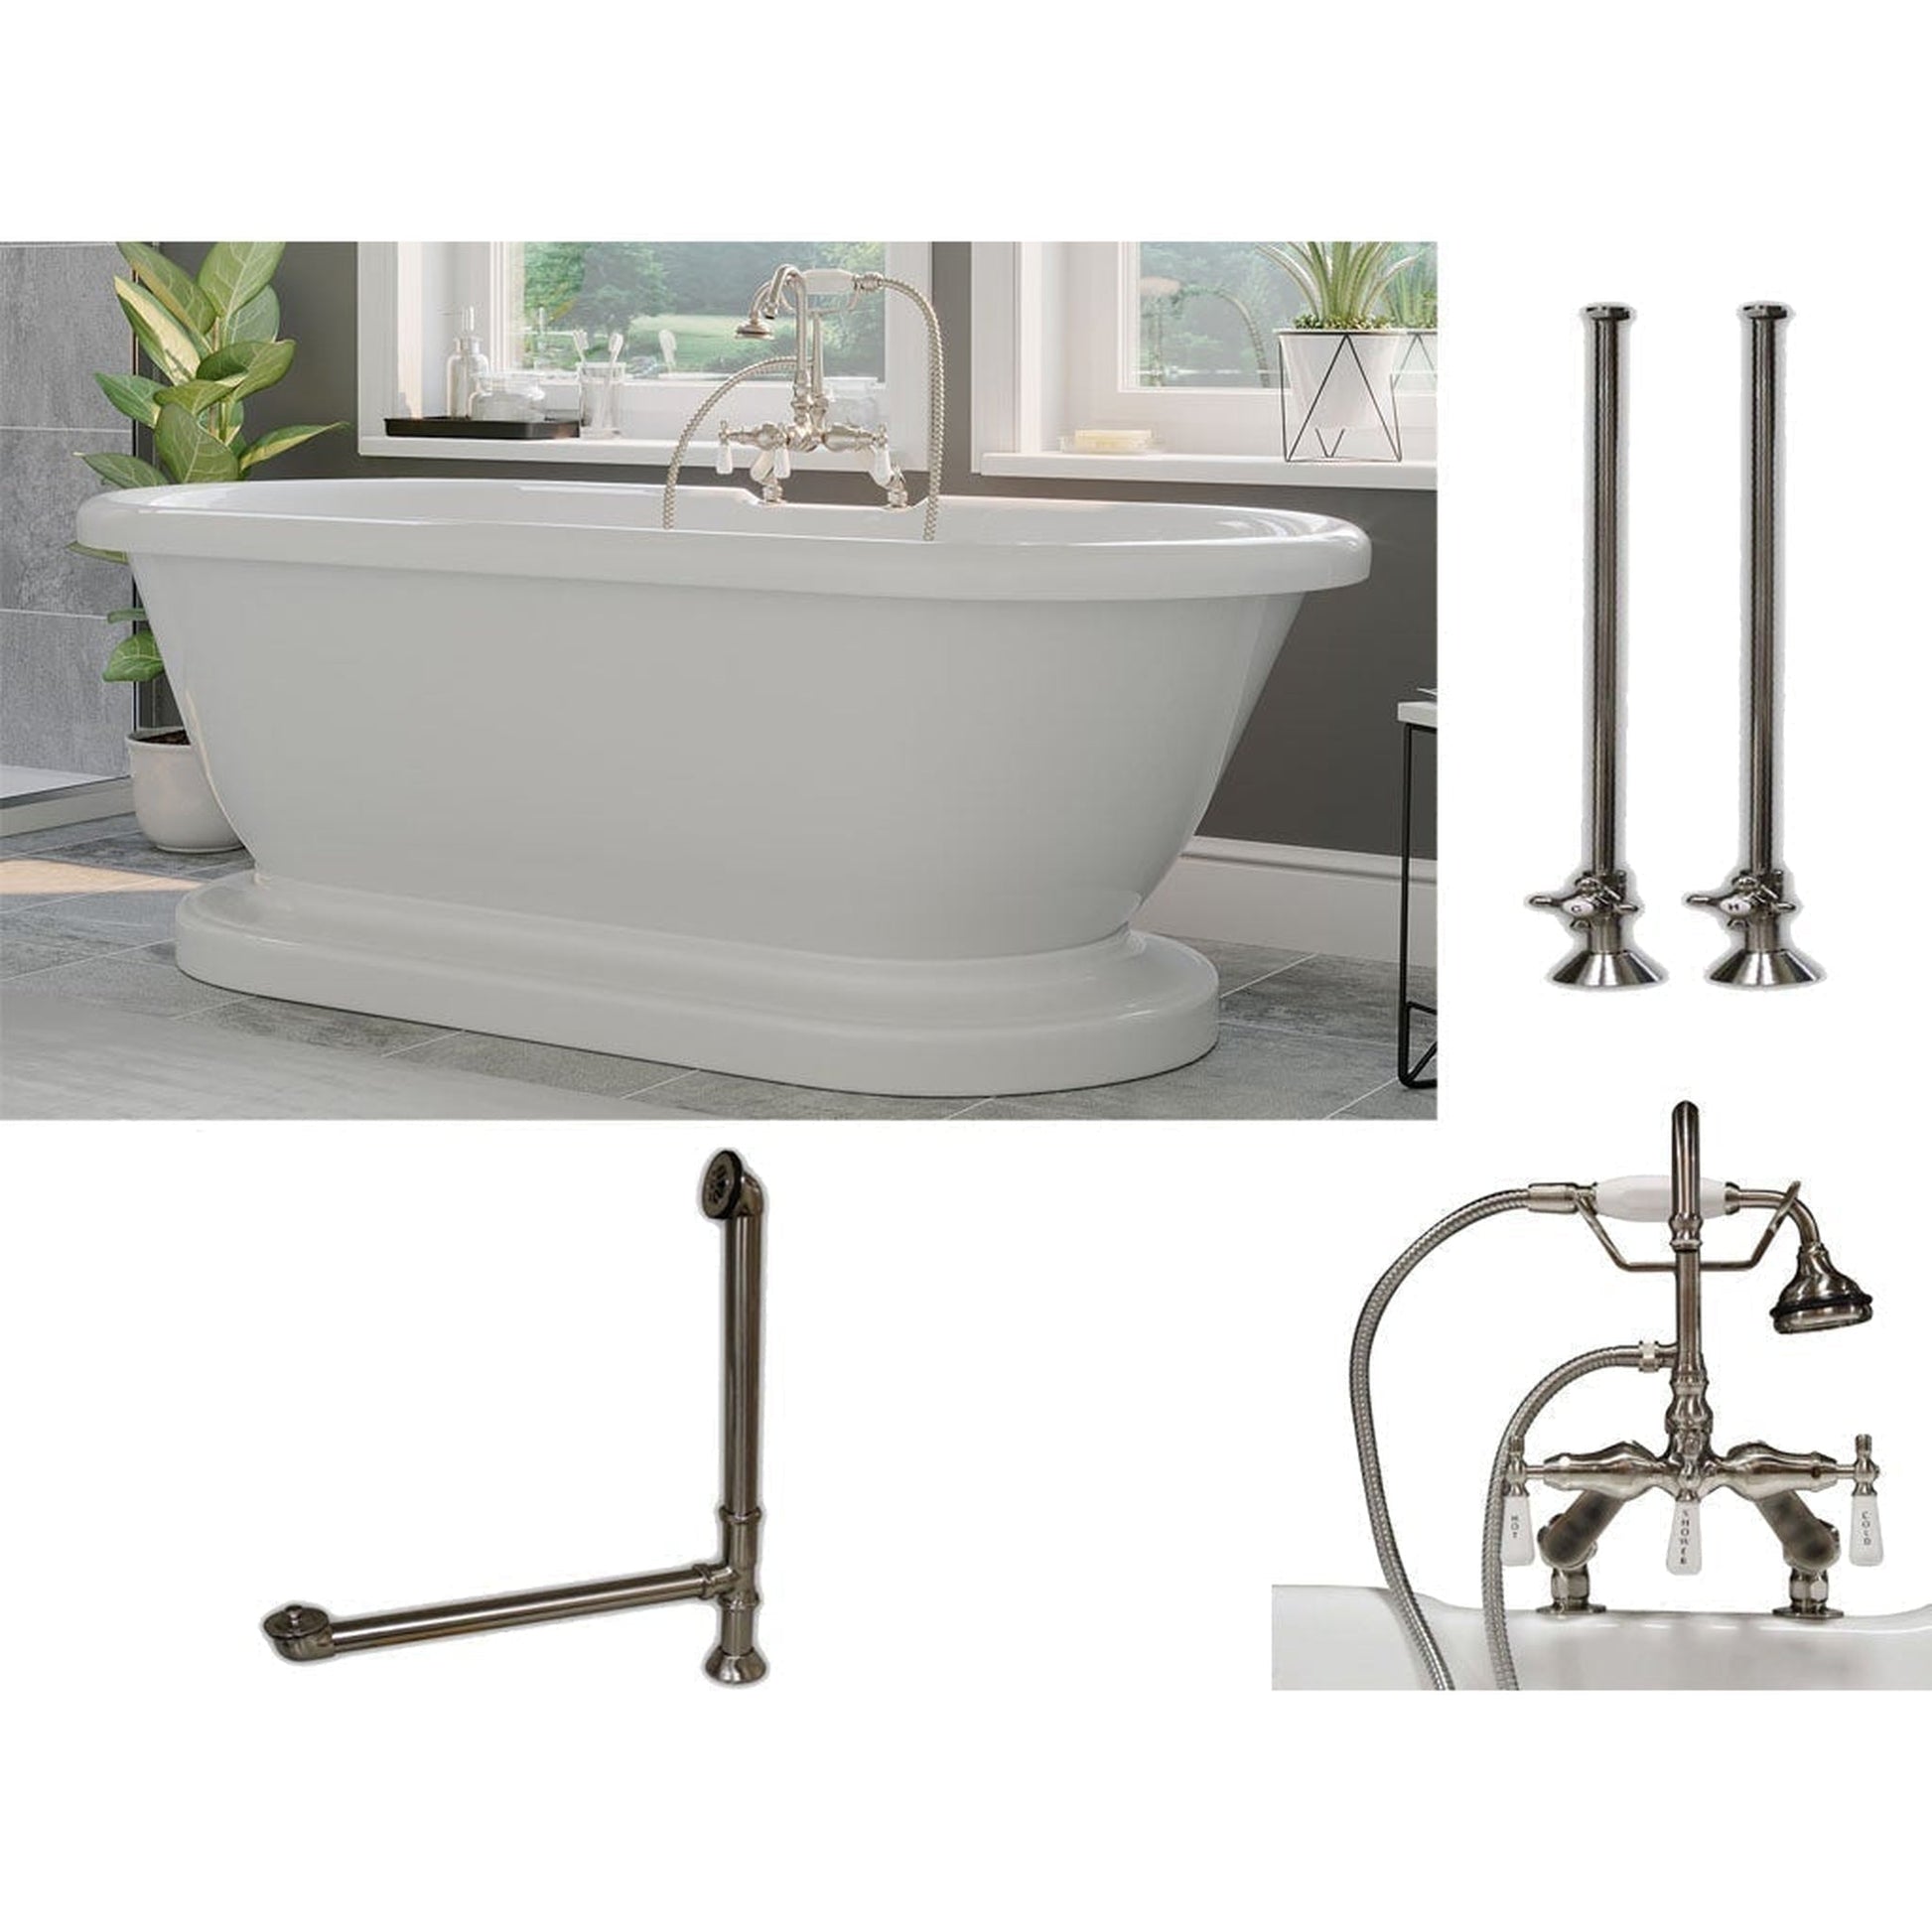 Cambridge Plumbing 70" White Acrylic Double Ended Pedestal Bathtub With Deck Holes And Complete Plumbing Package Including Porcelain Lever English Telephone Brass Faucet, Supply Lines, Drain And Overflow Assembly In Polished Chrome